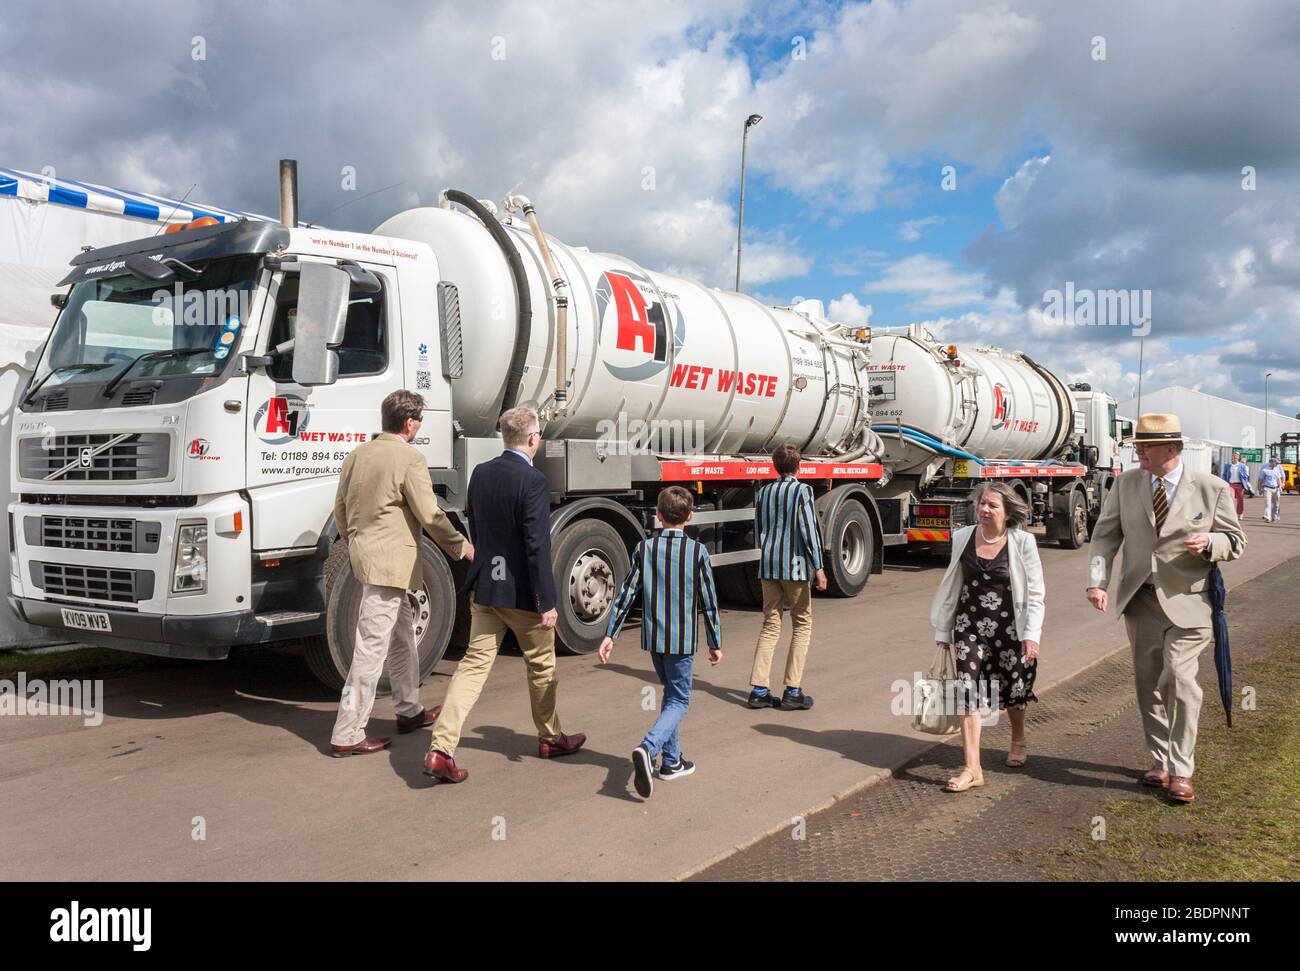 Festival goers walk past wet waste lorries at Henley Royal Regatta, Henley-on-Thames, Oxfordshire, England, GB, Uk. Stock Photo